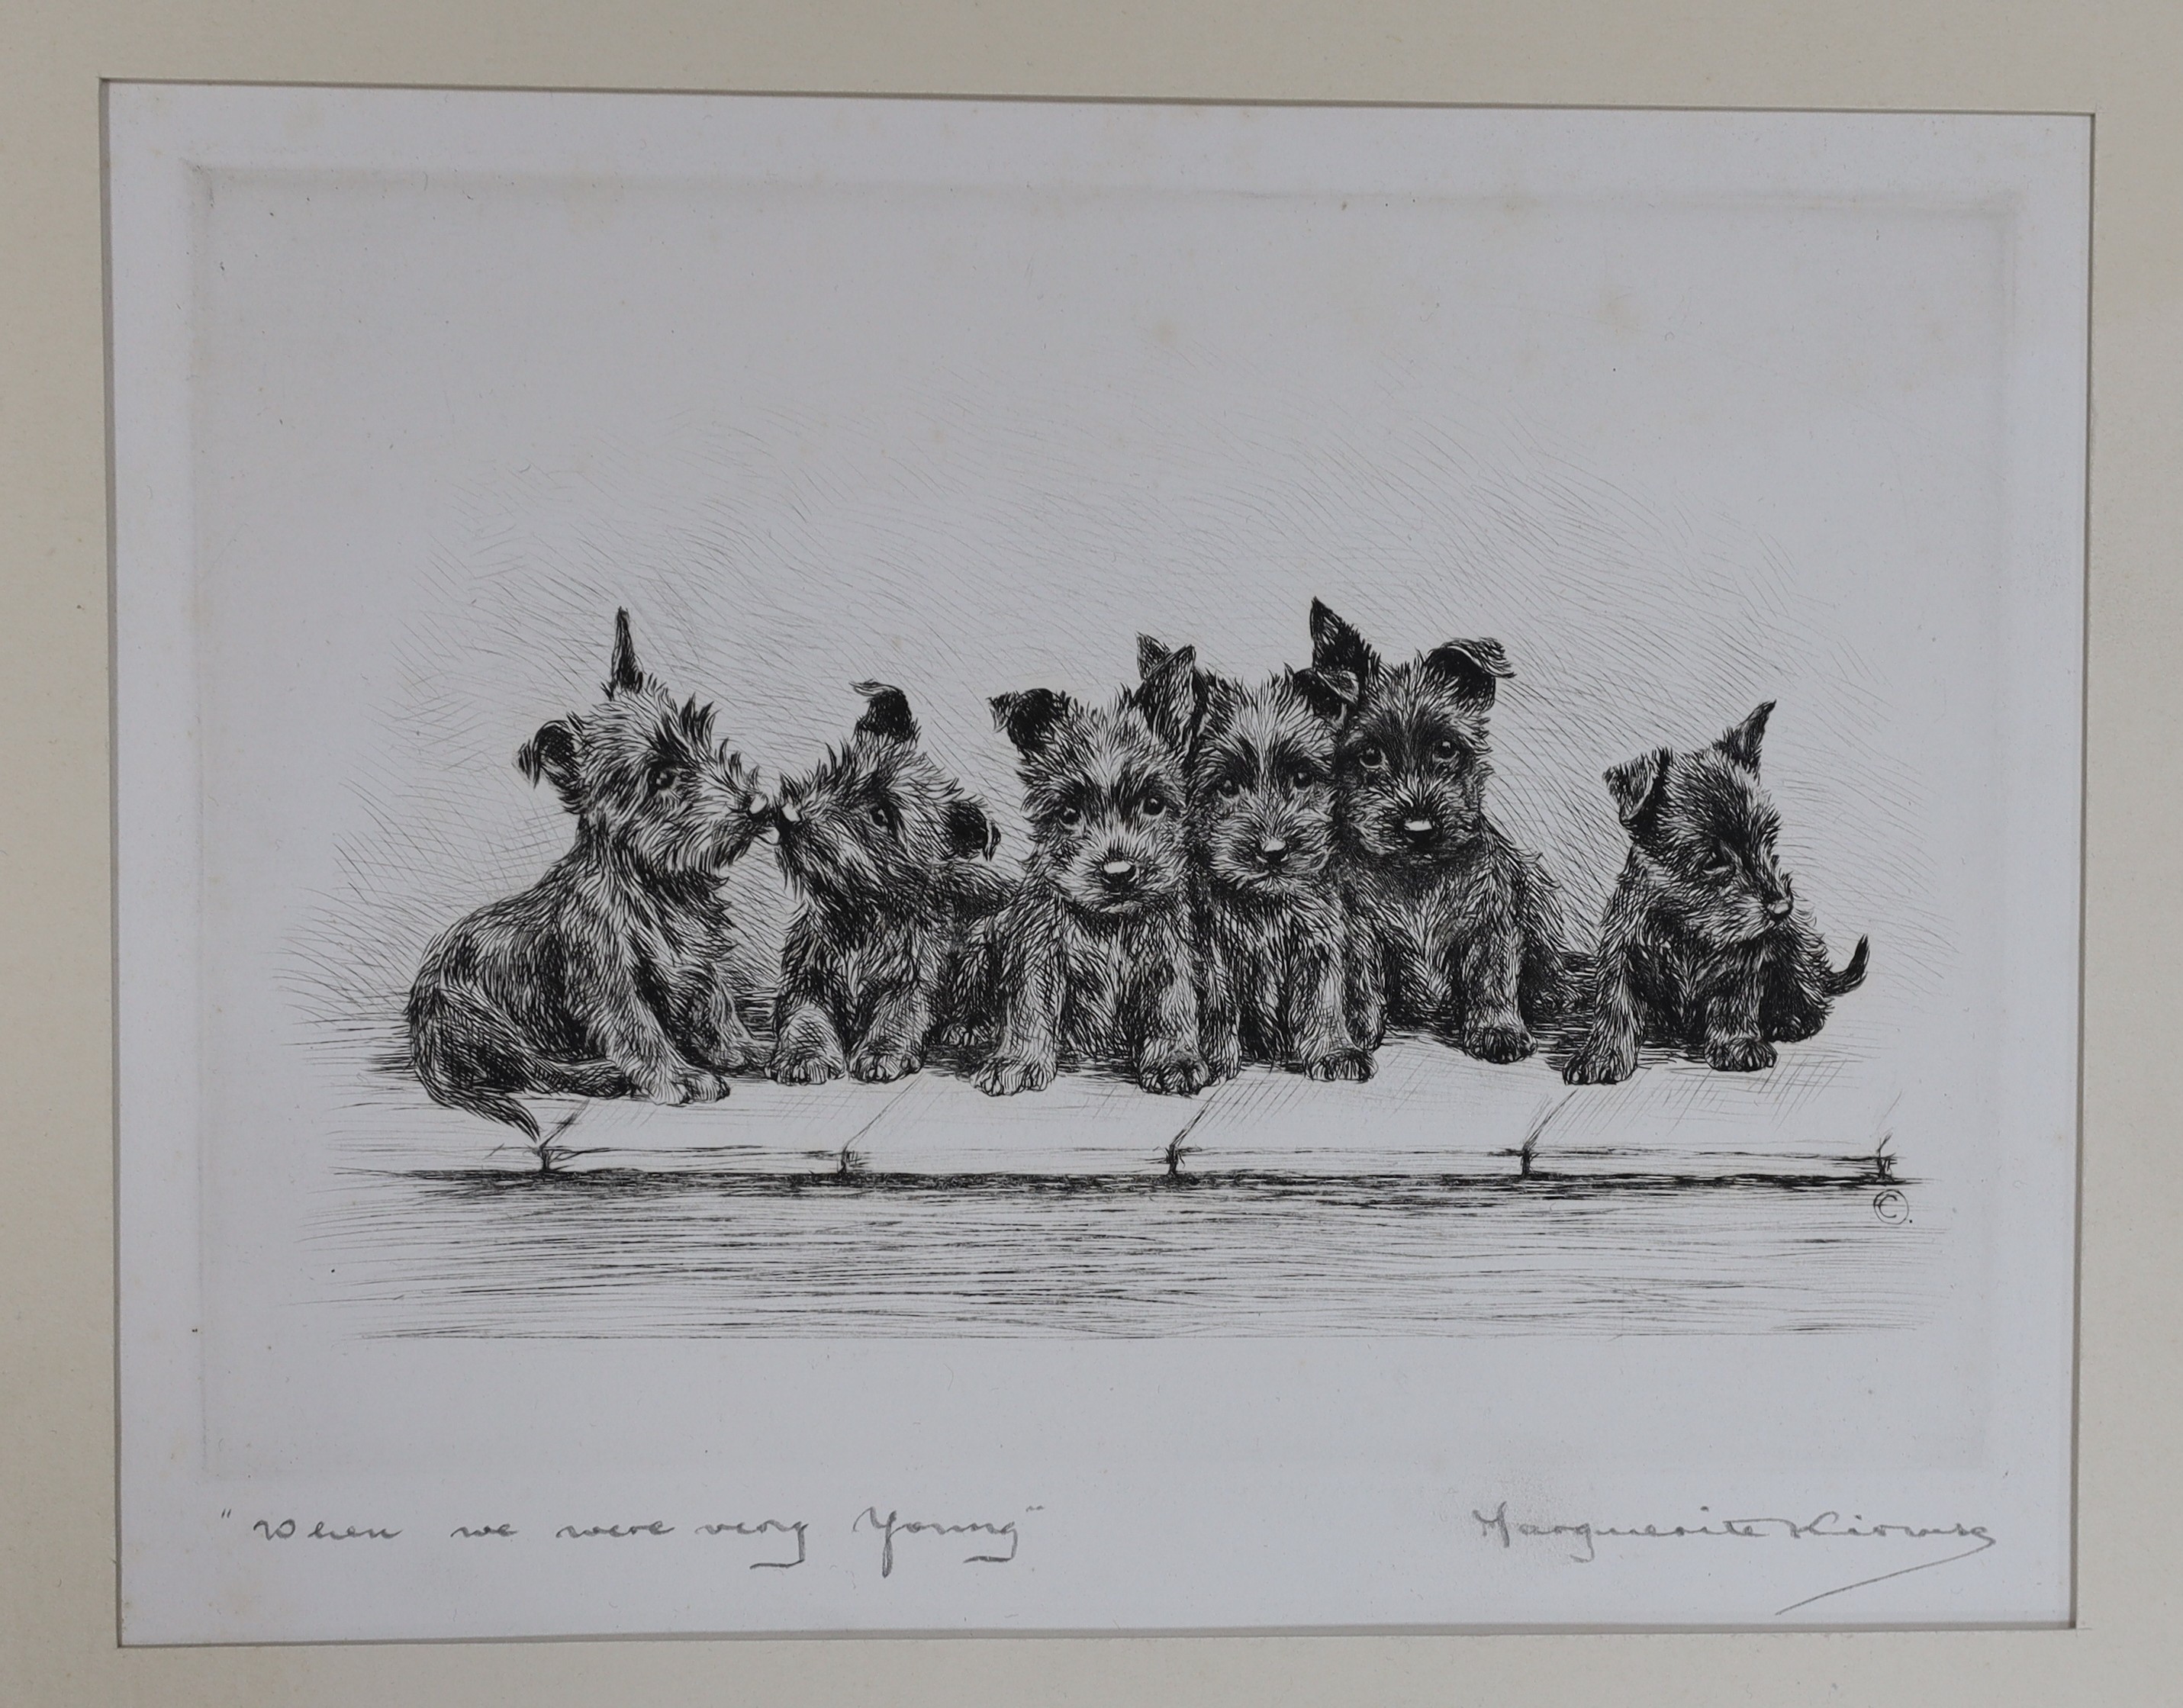 Marguerite Kirmse (1885-1954), three artist proof etchings, 'When we were very young', 'Seeing things' and 'We', signed in pencil, largest 17 x 22cm, unframed